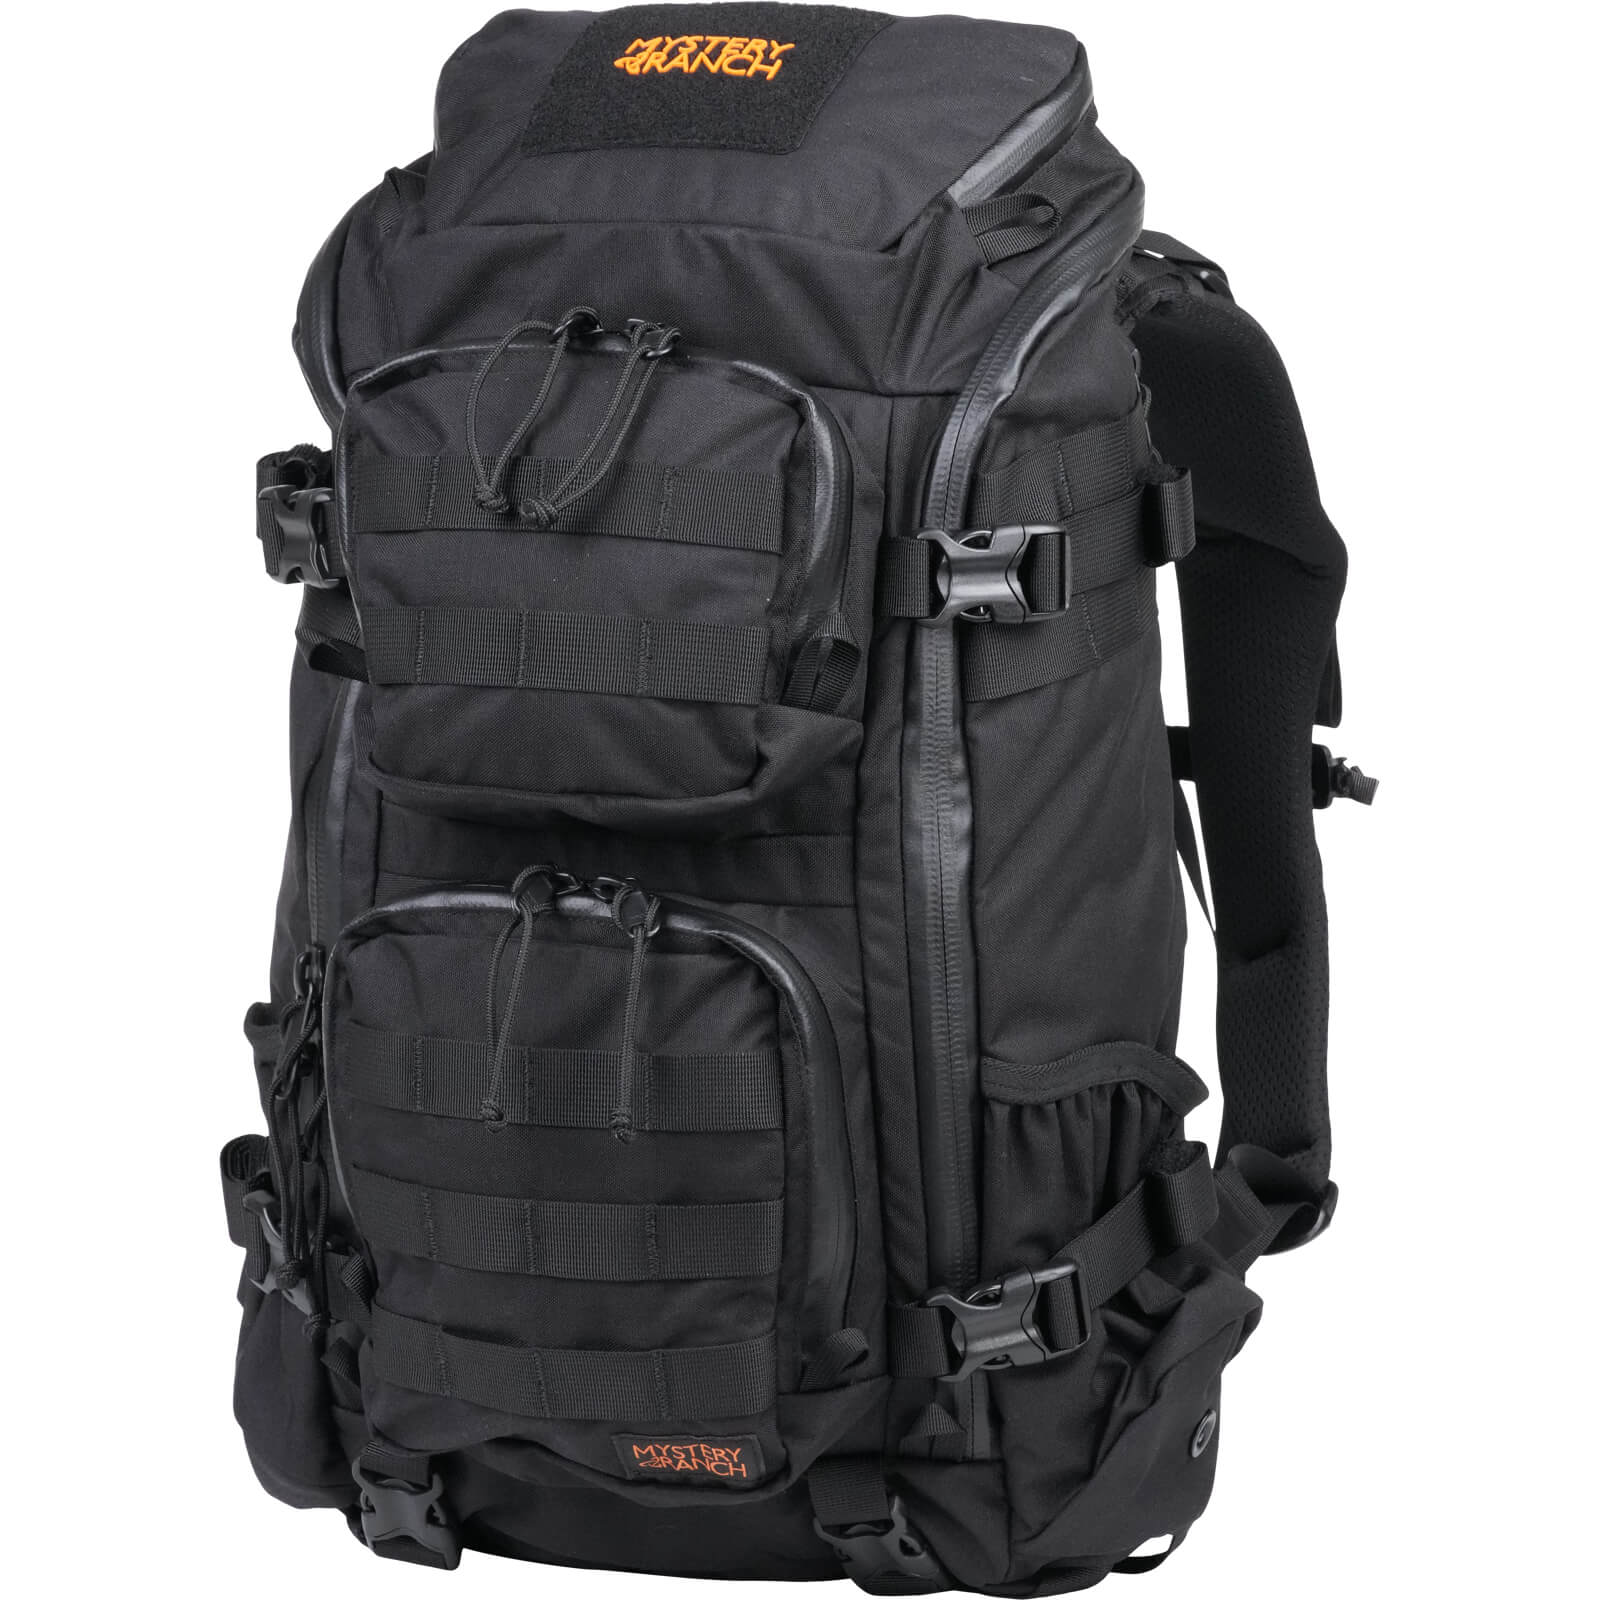 3 Day Assault CL Pack | MYSTERY RANCH Backpacks